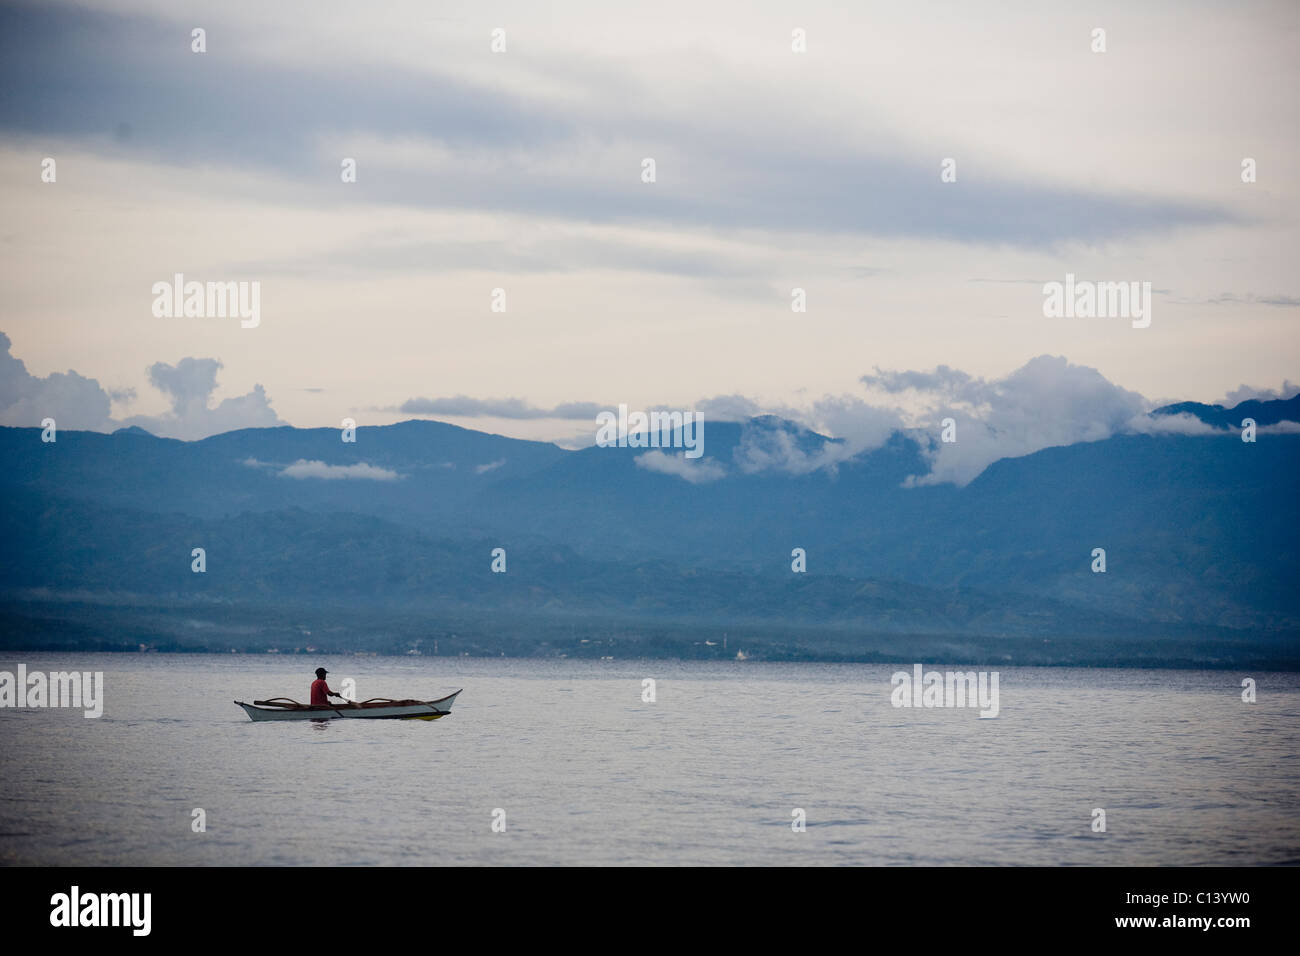 Small rowing boat in South China Sea Stock Photo